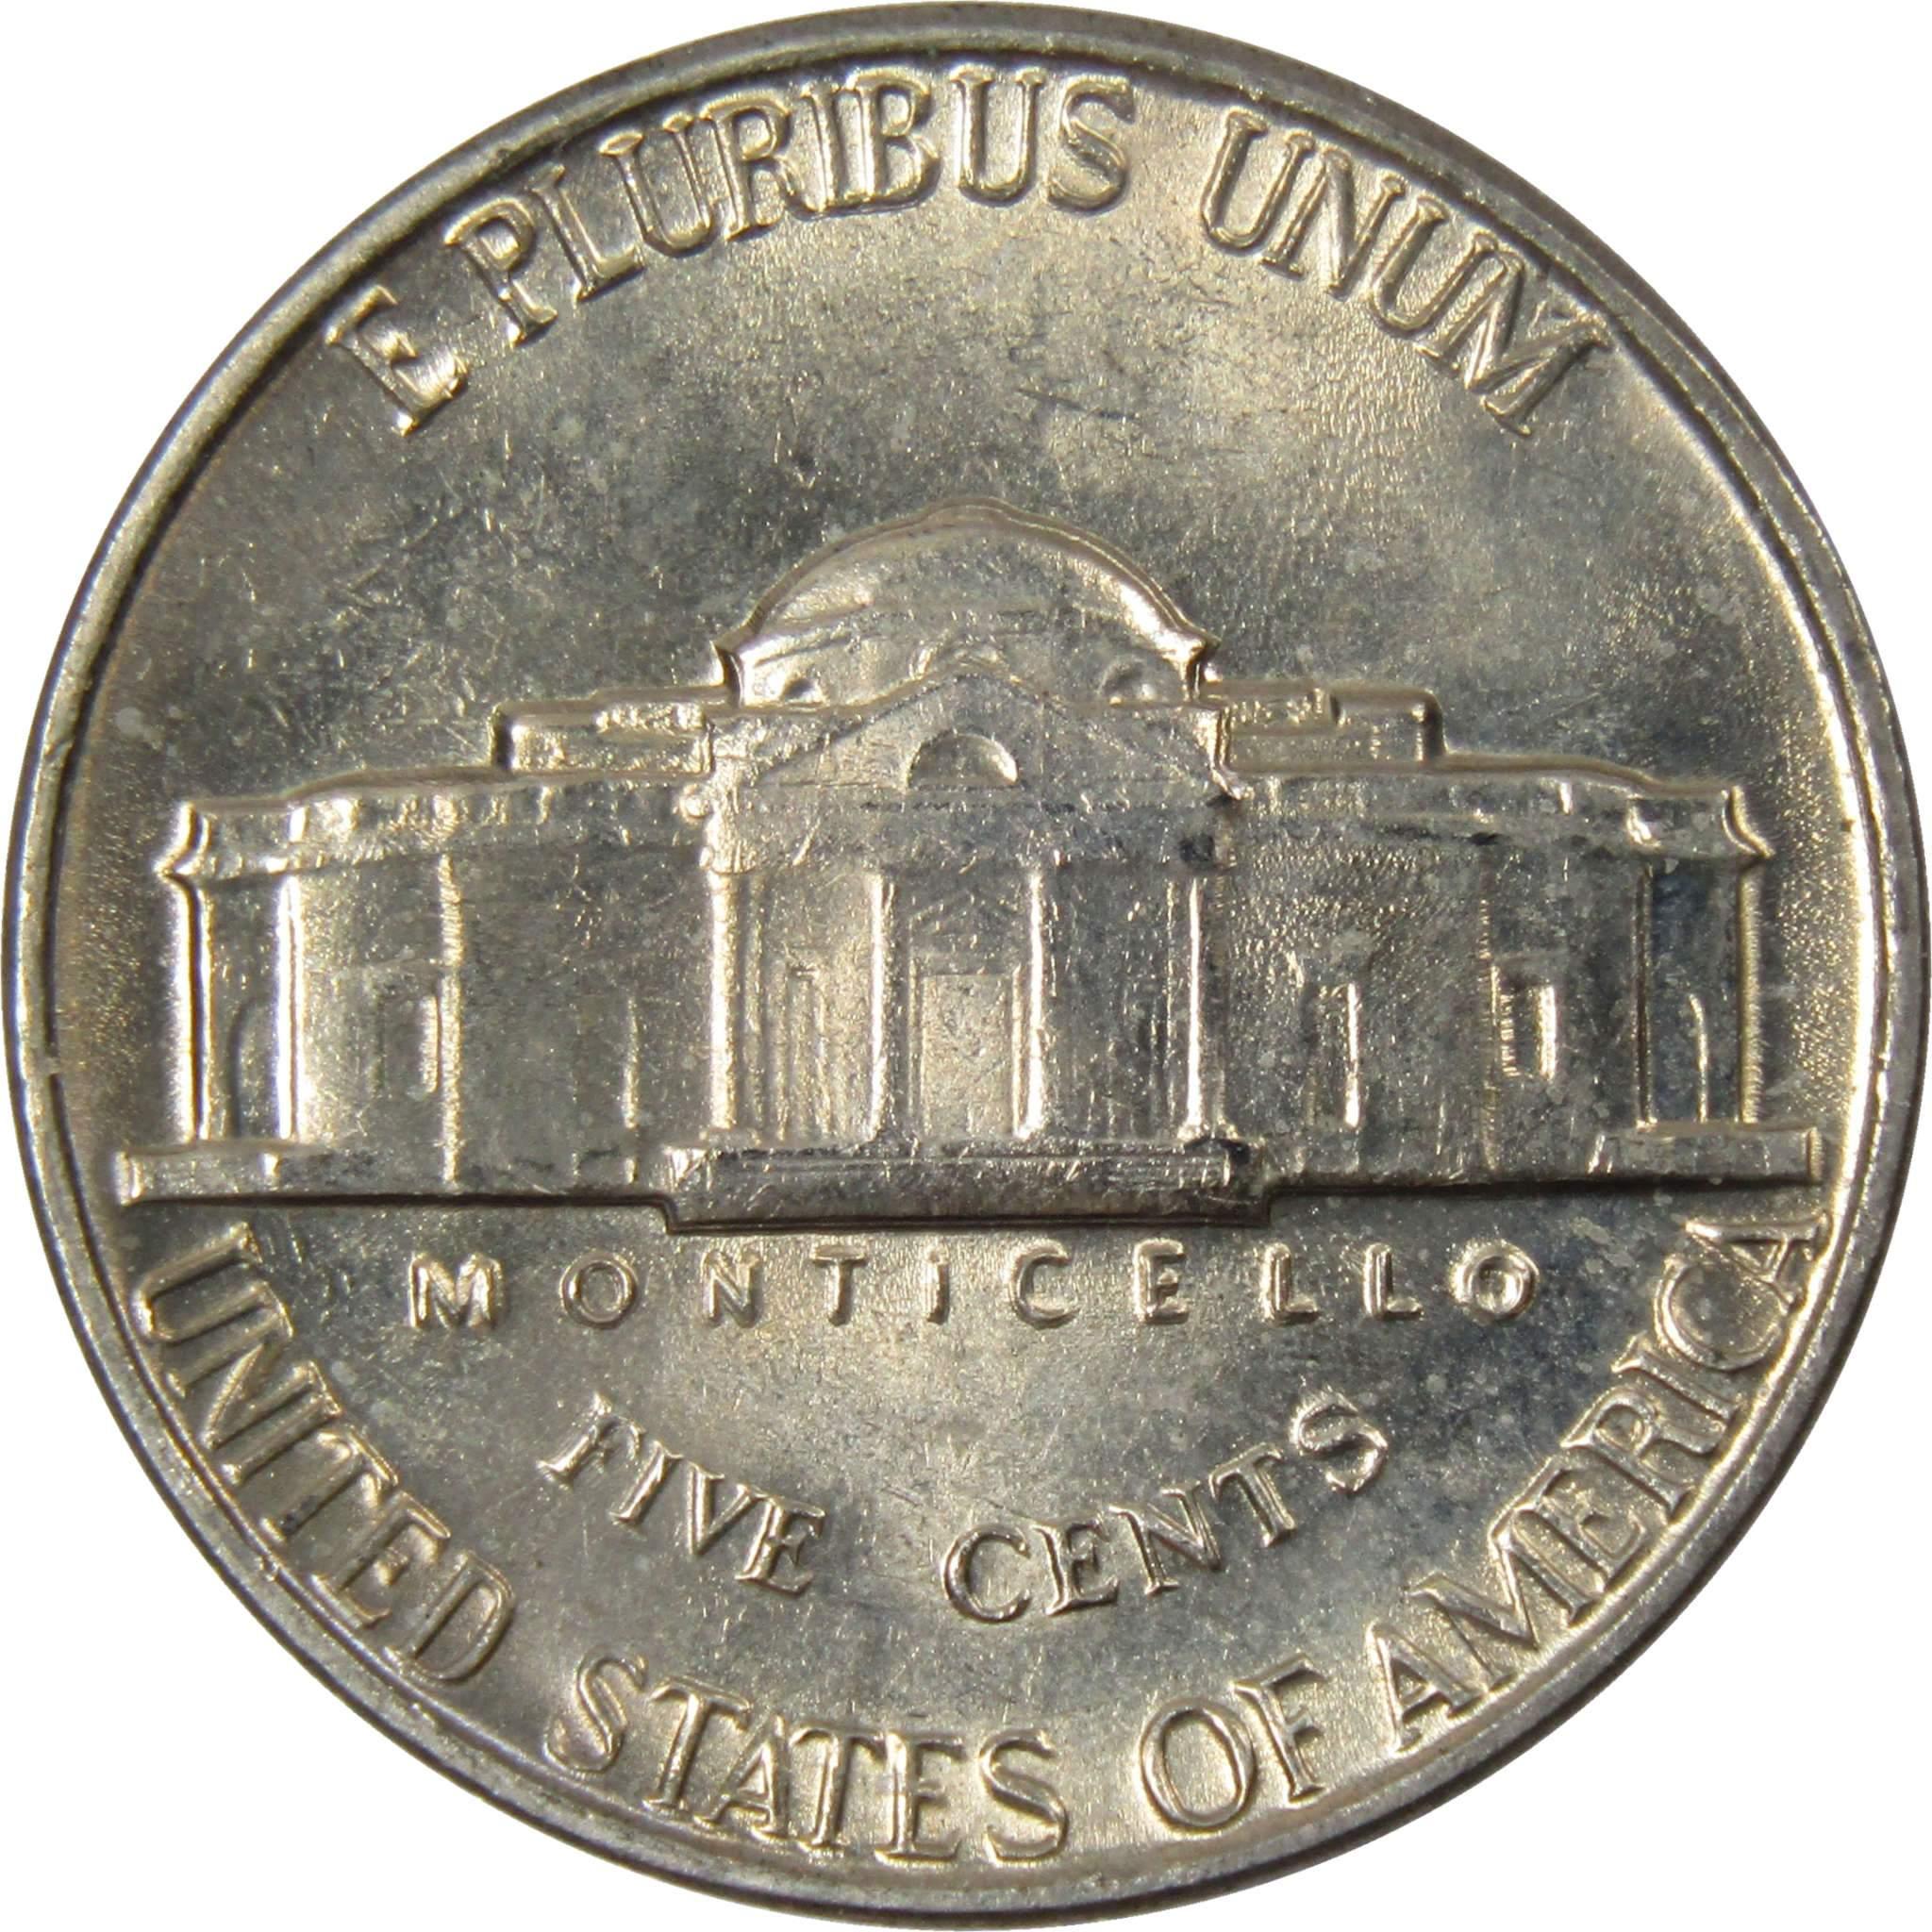 1961 Jefferson Nickel 5 Cent Piece BU Uncirculated Mint State 5c US Coin